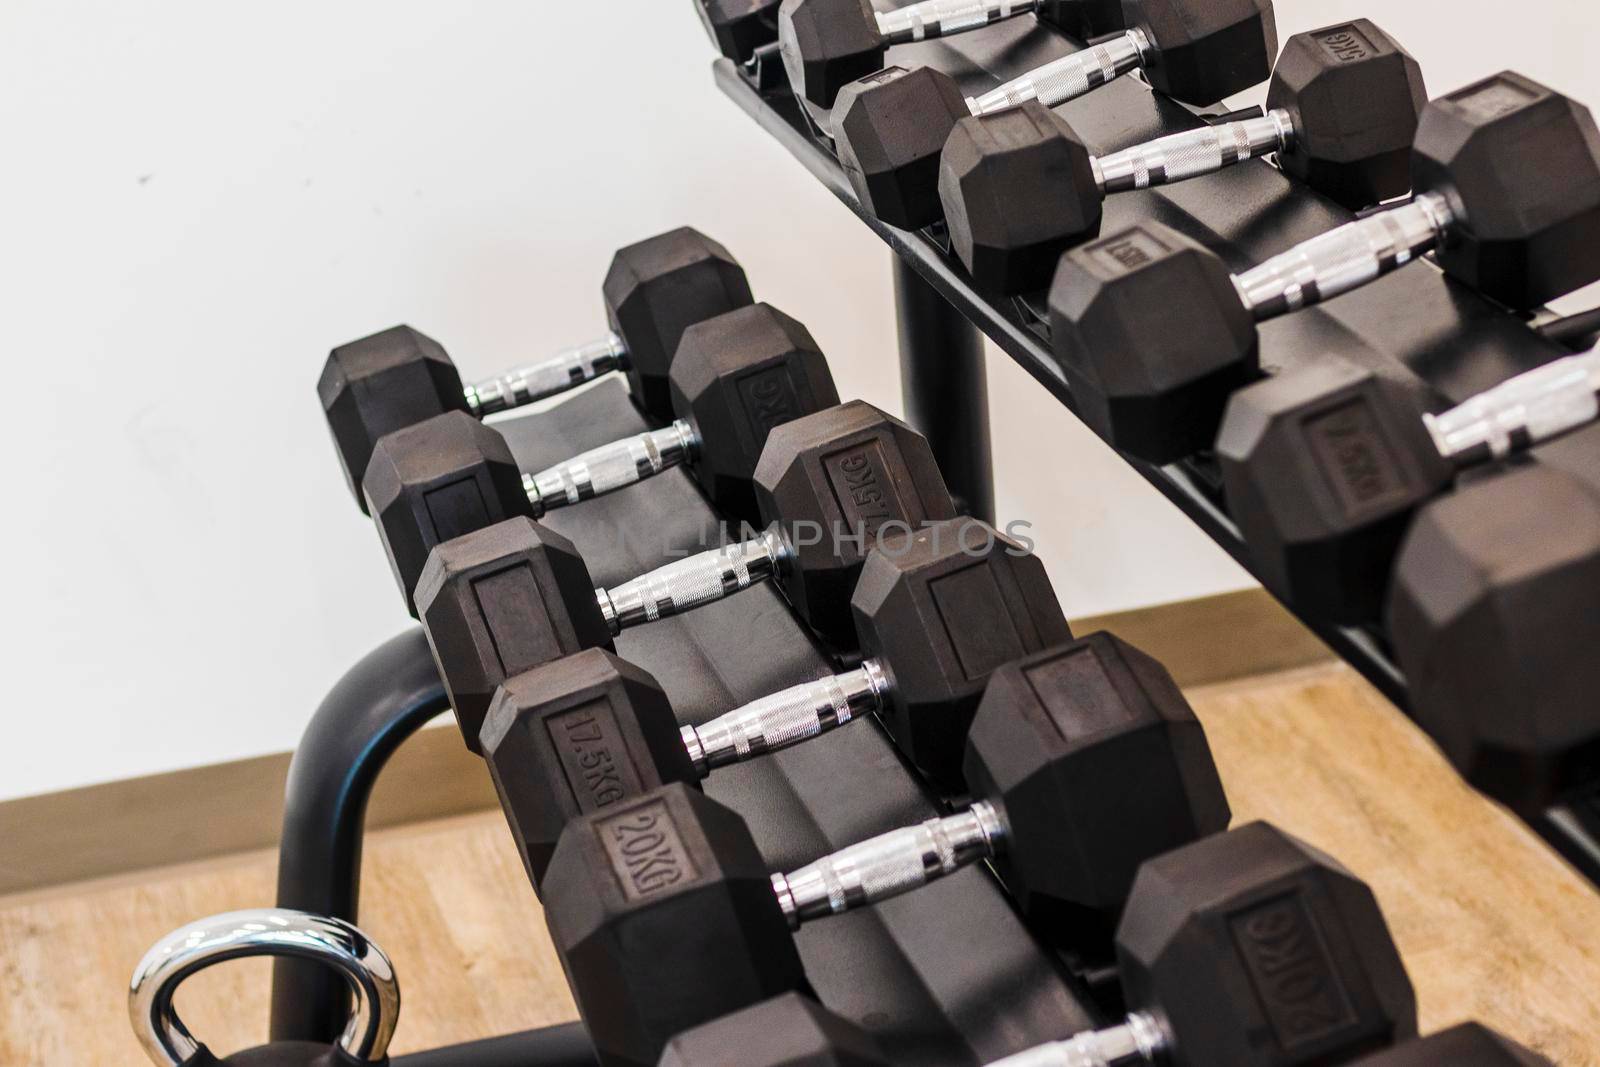 Close up shot of various gym equipment and weights